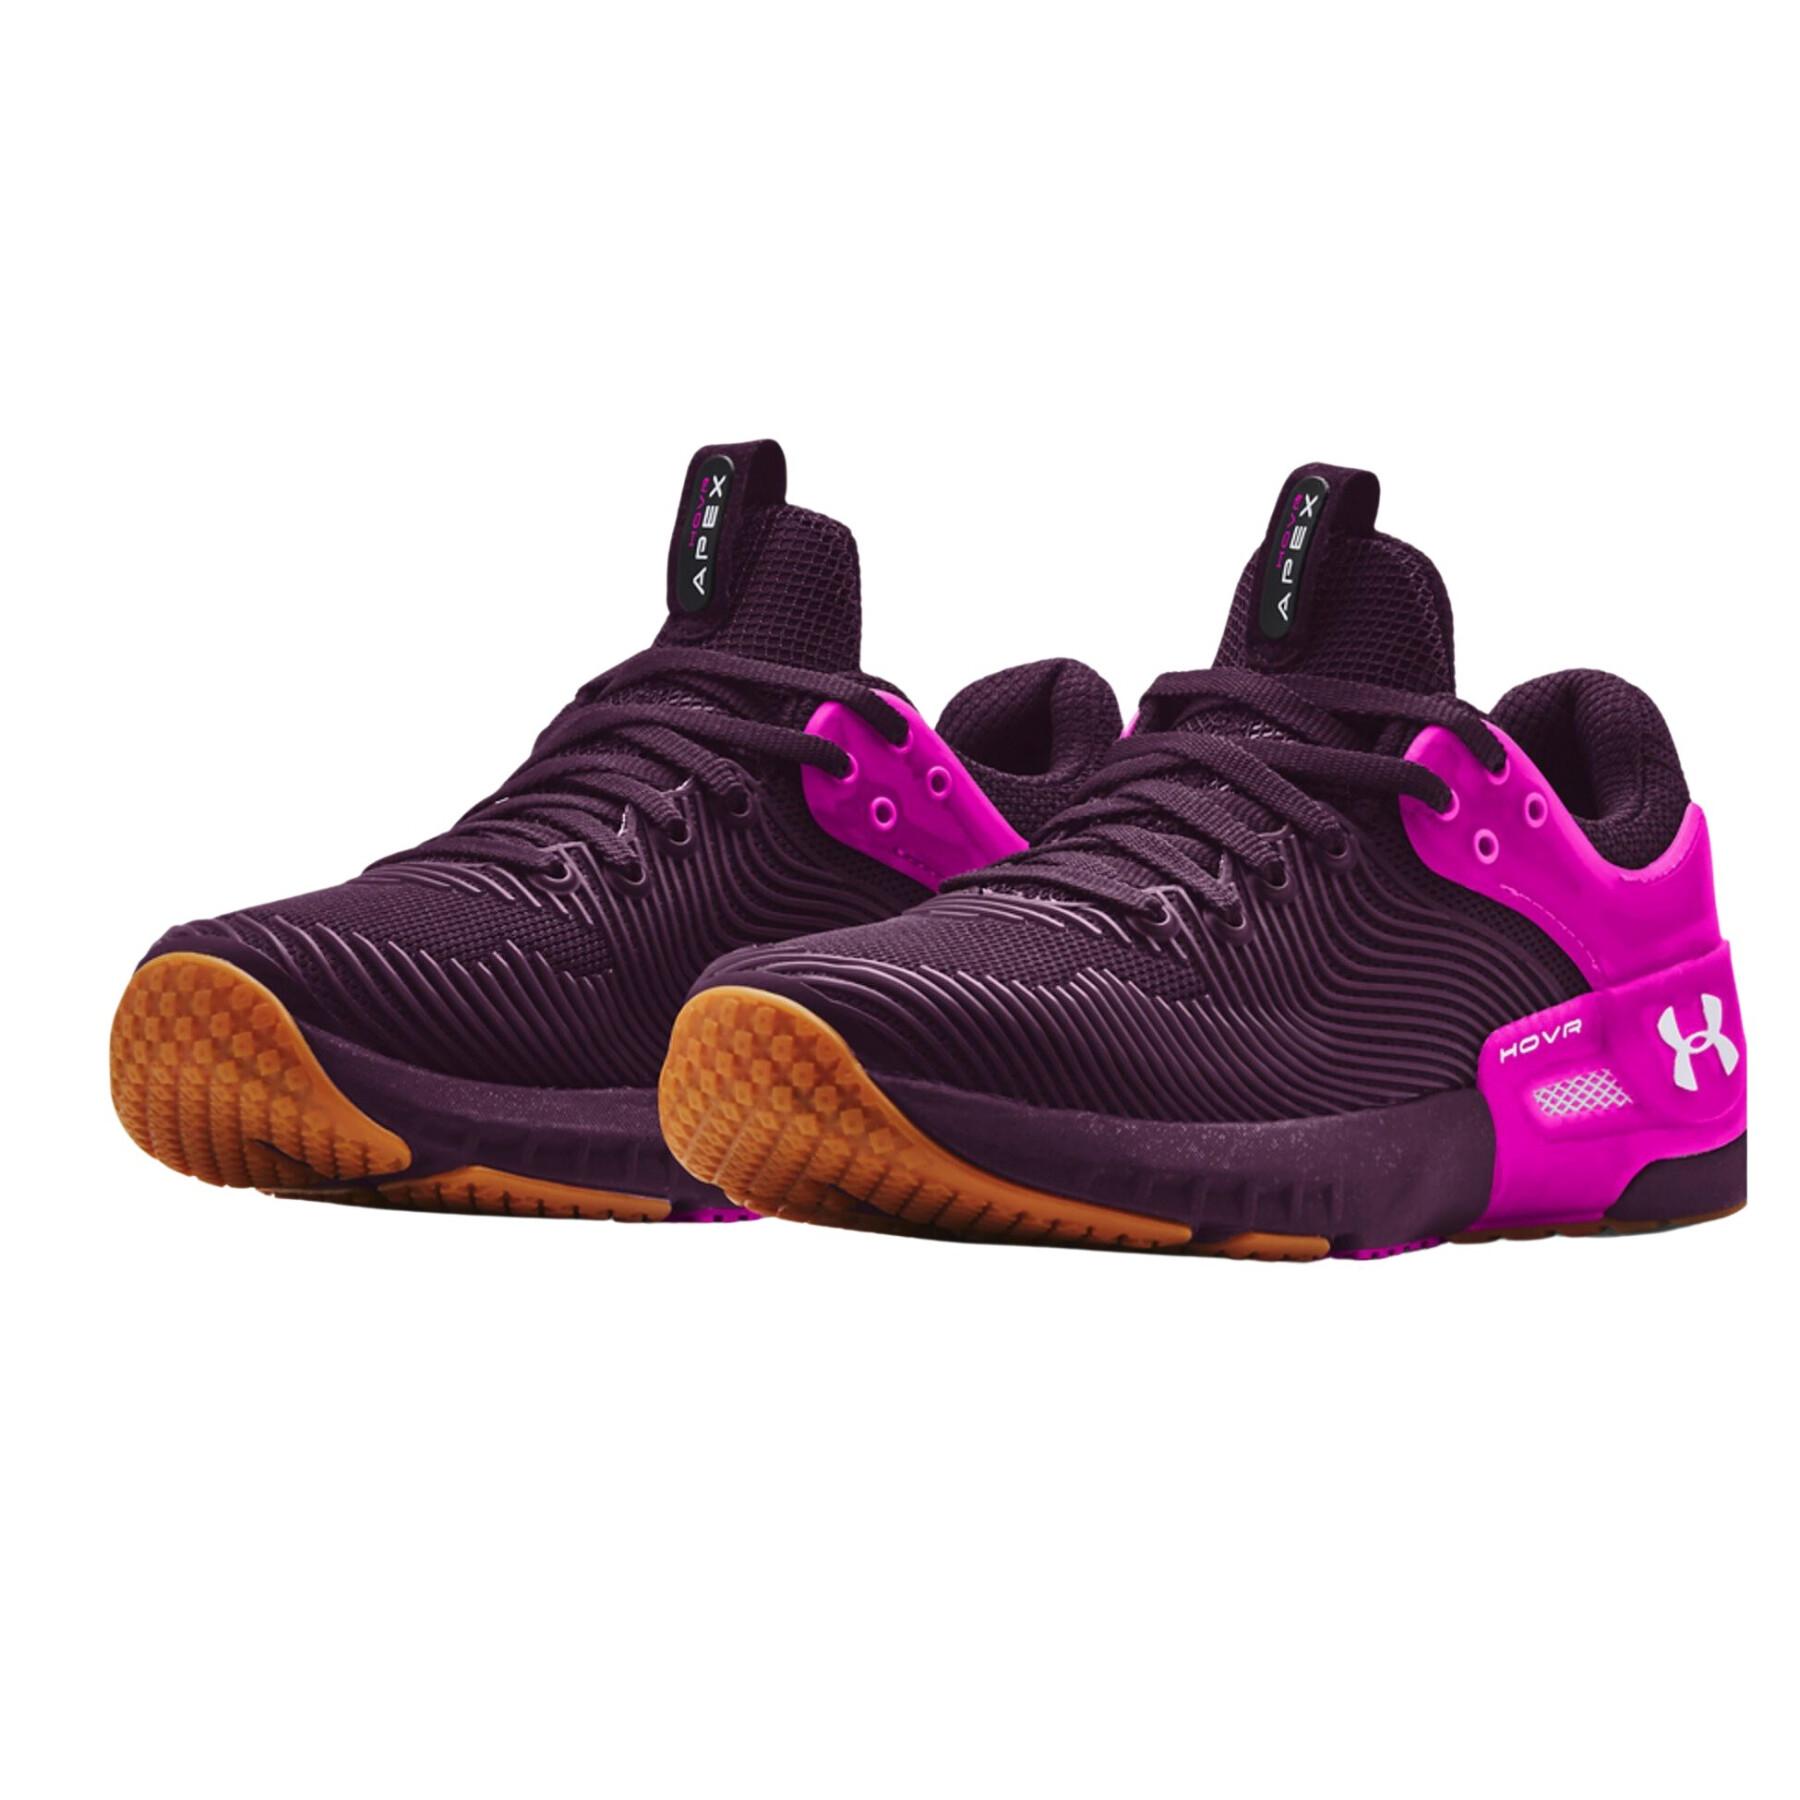 Women's shoes Under Armour HOVR Apex 2 Gloss